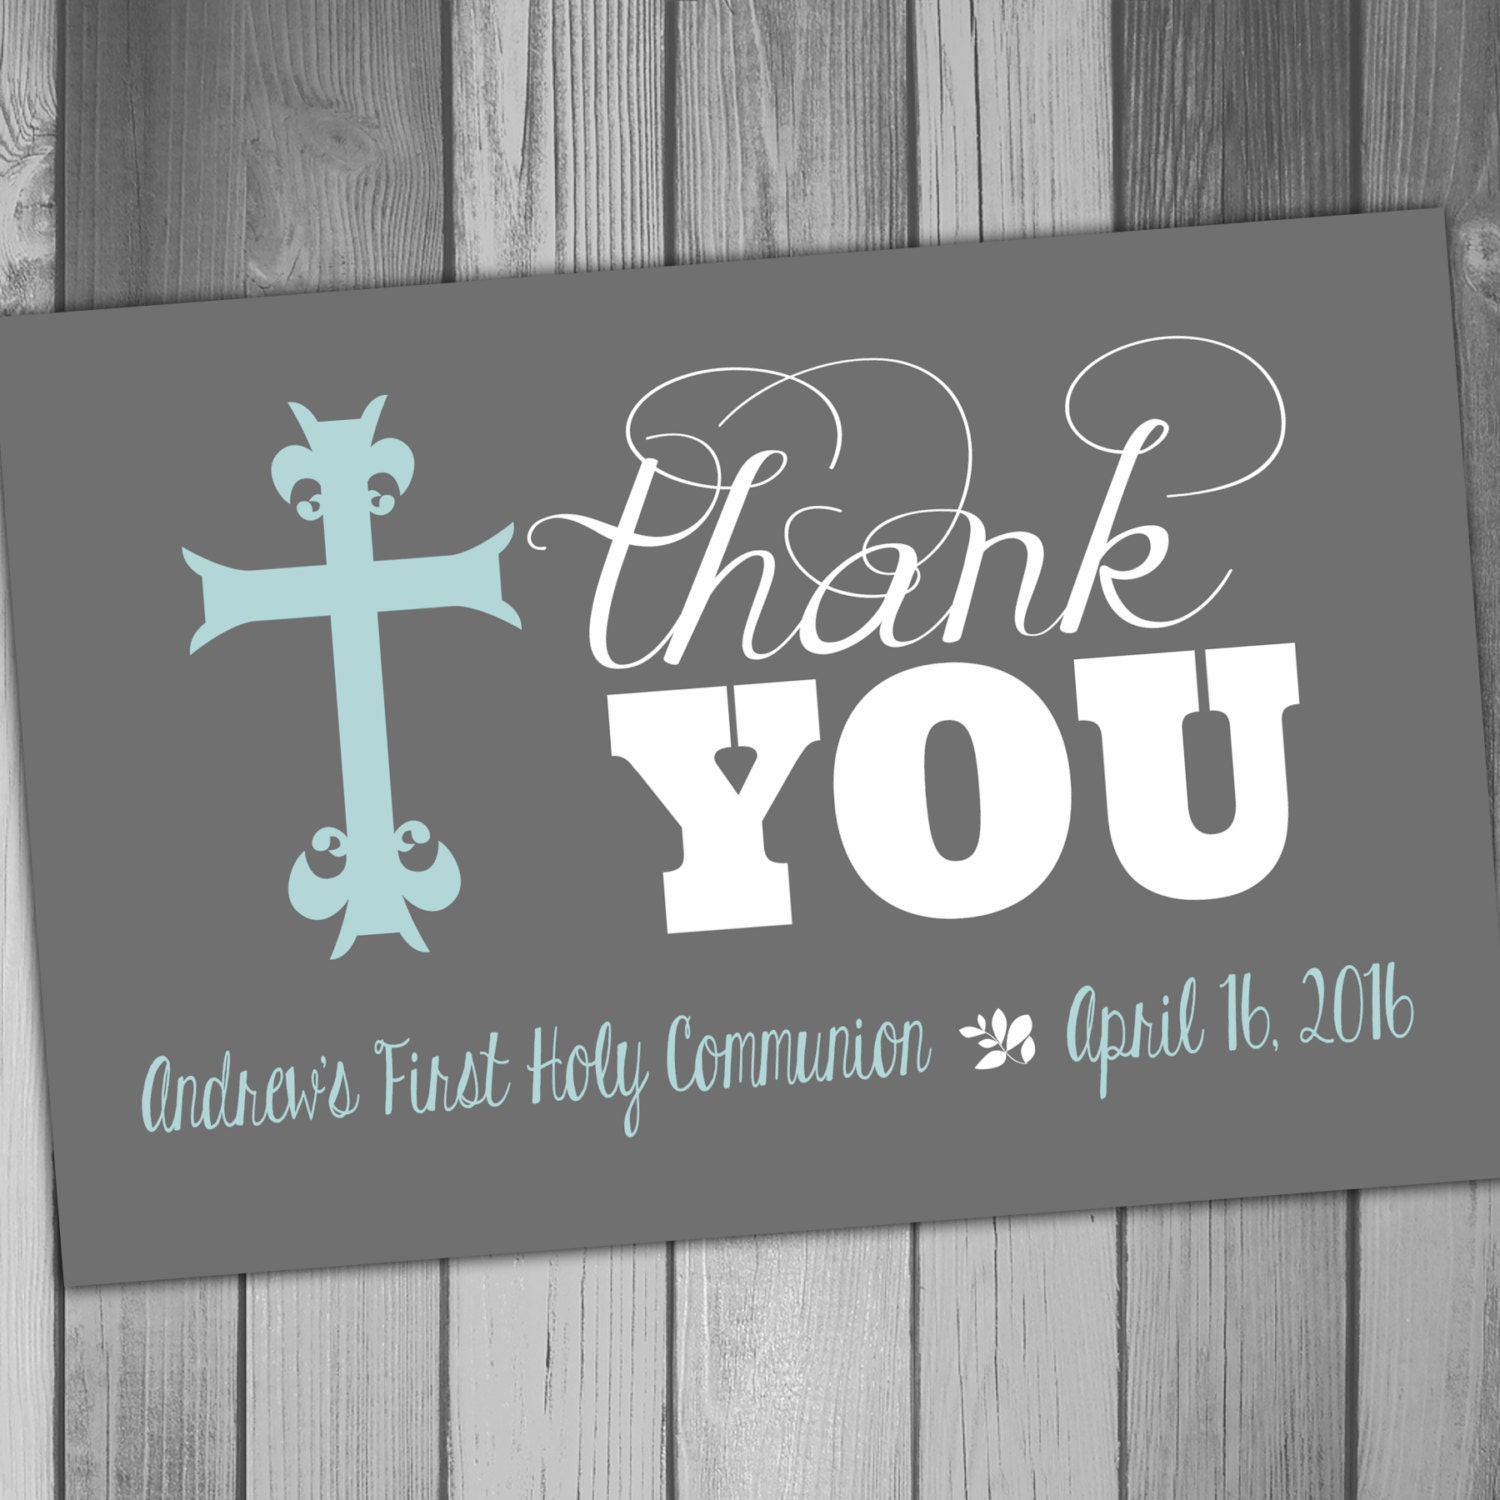 Holy Communion Thank You Cards Template